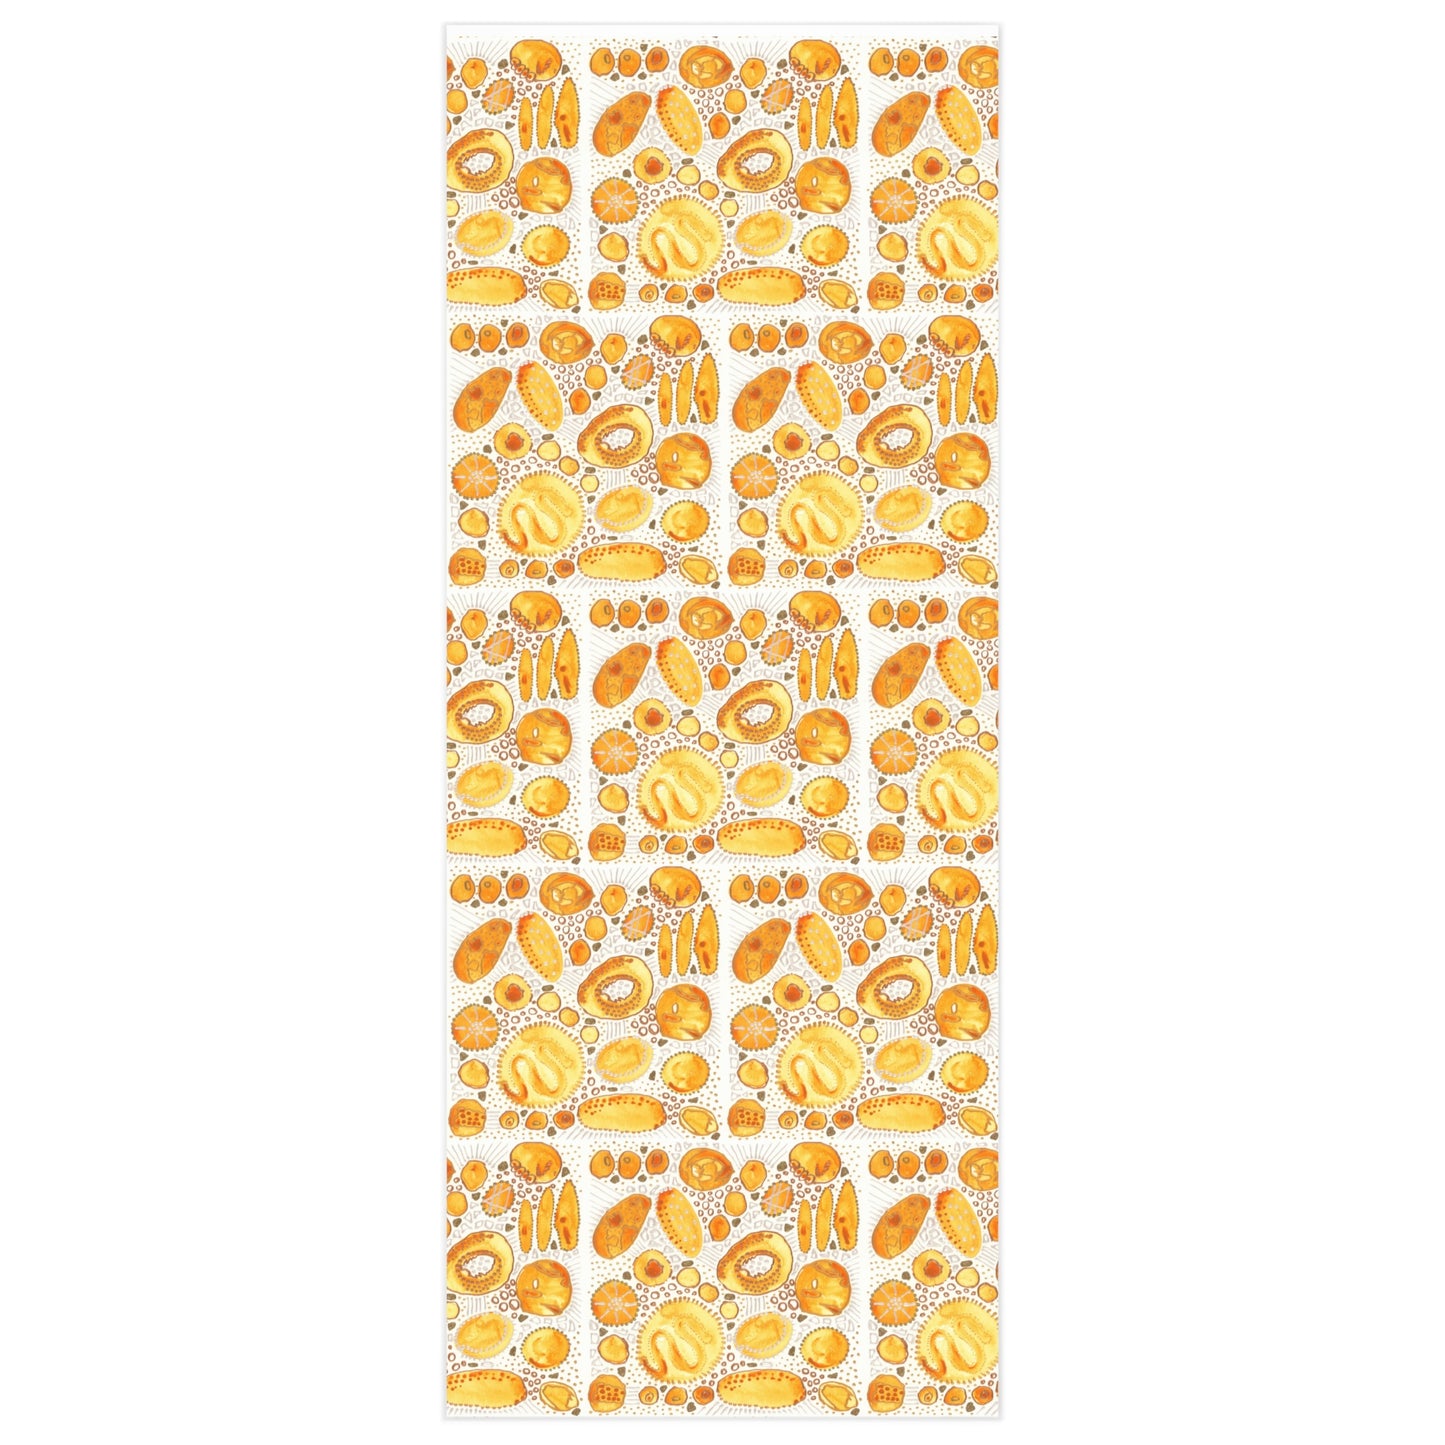 Wrapping Paper - "Yellow Bliss Bubbles"